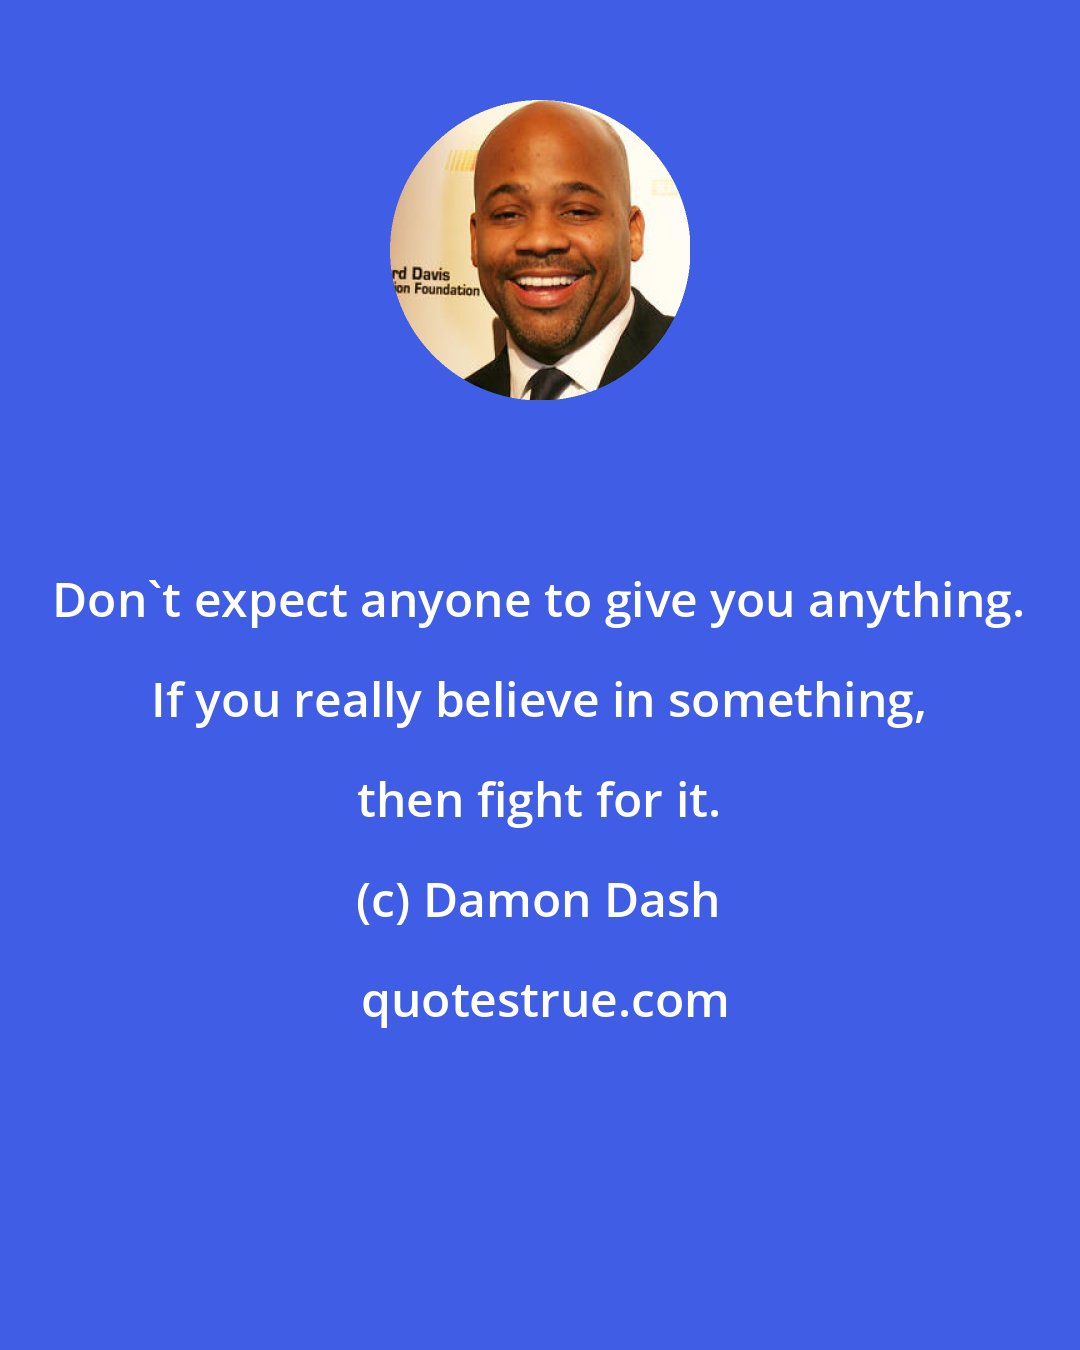 Damon Dash: Don't expect anyone to give you anything. If you really believe in something, then fight for it.